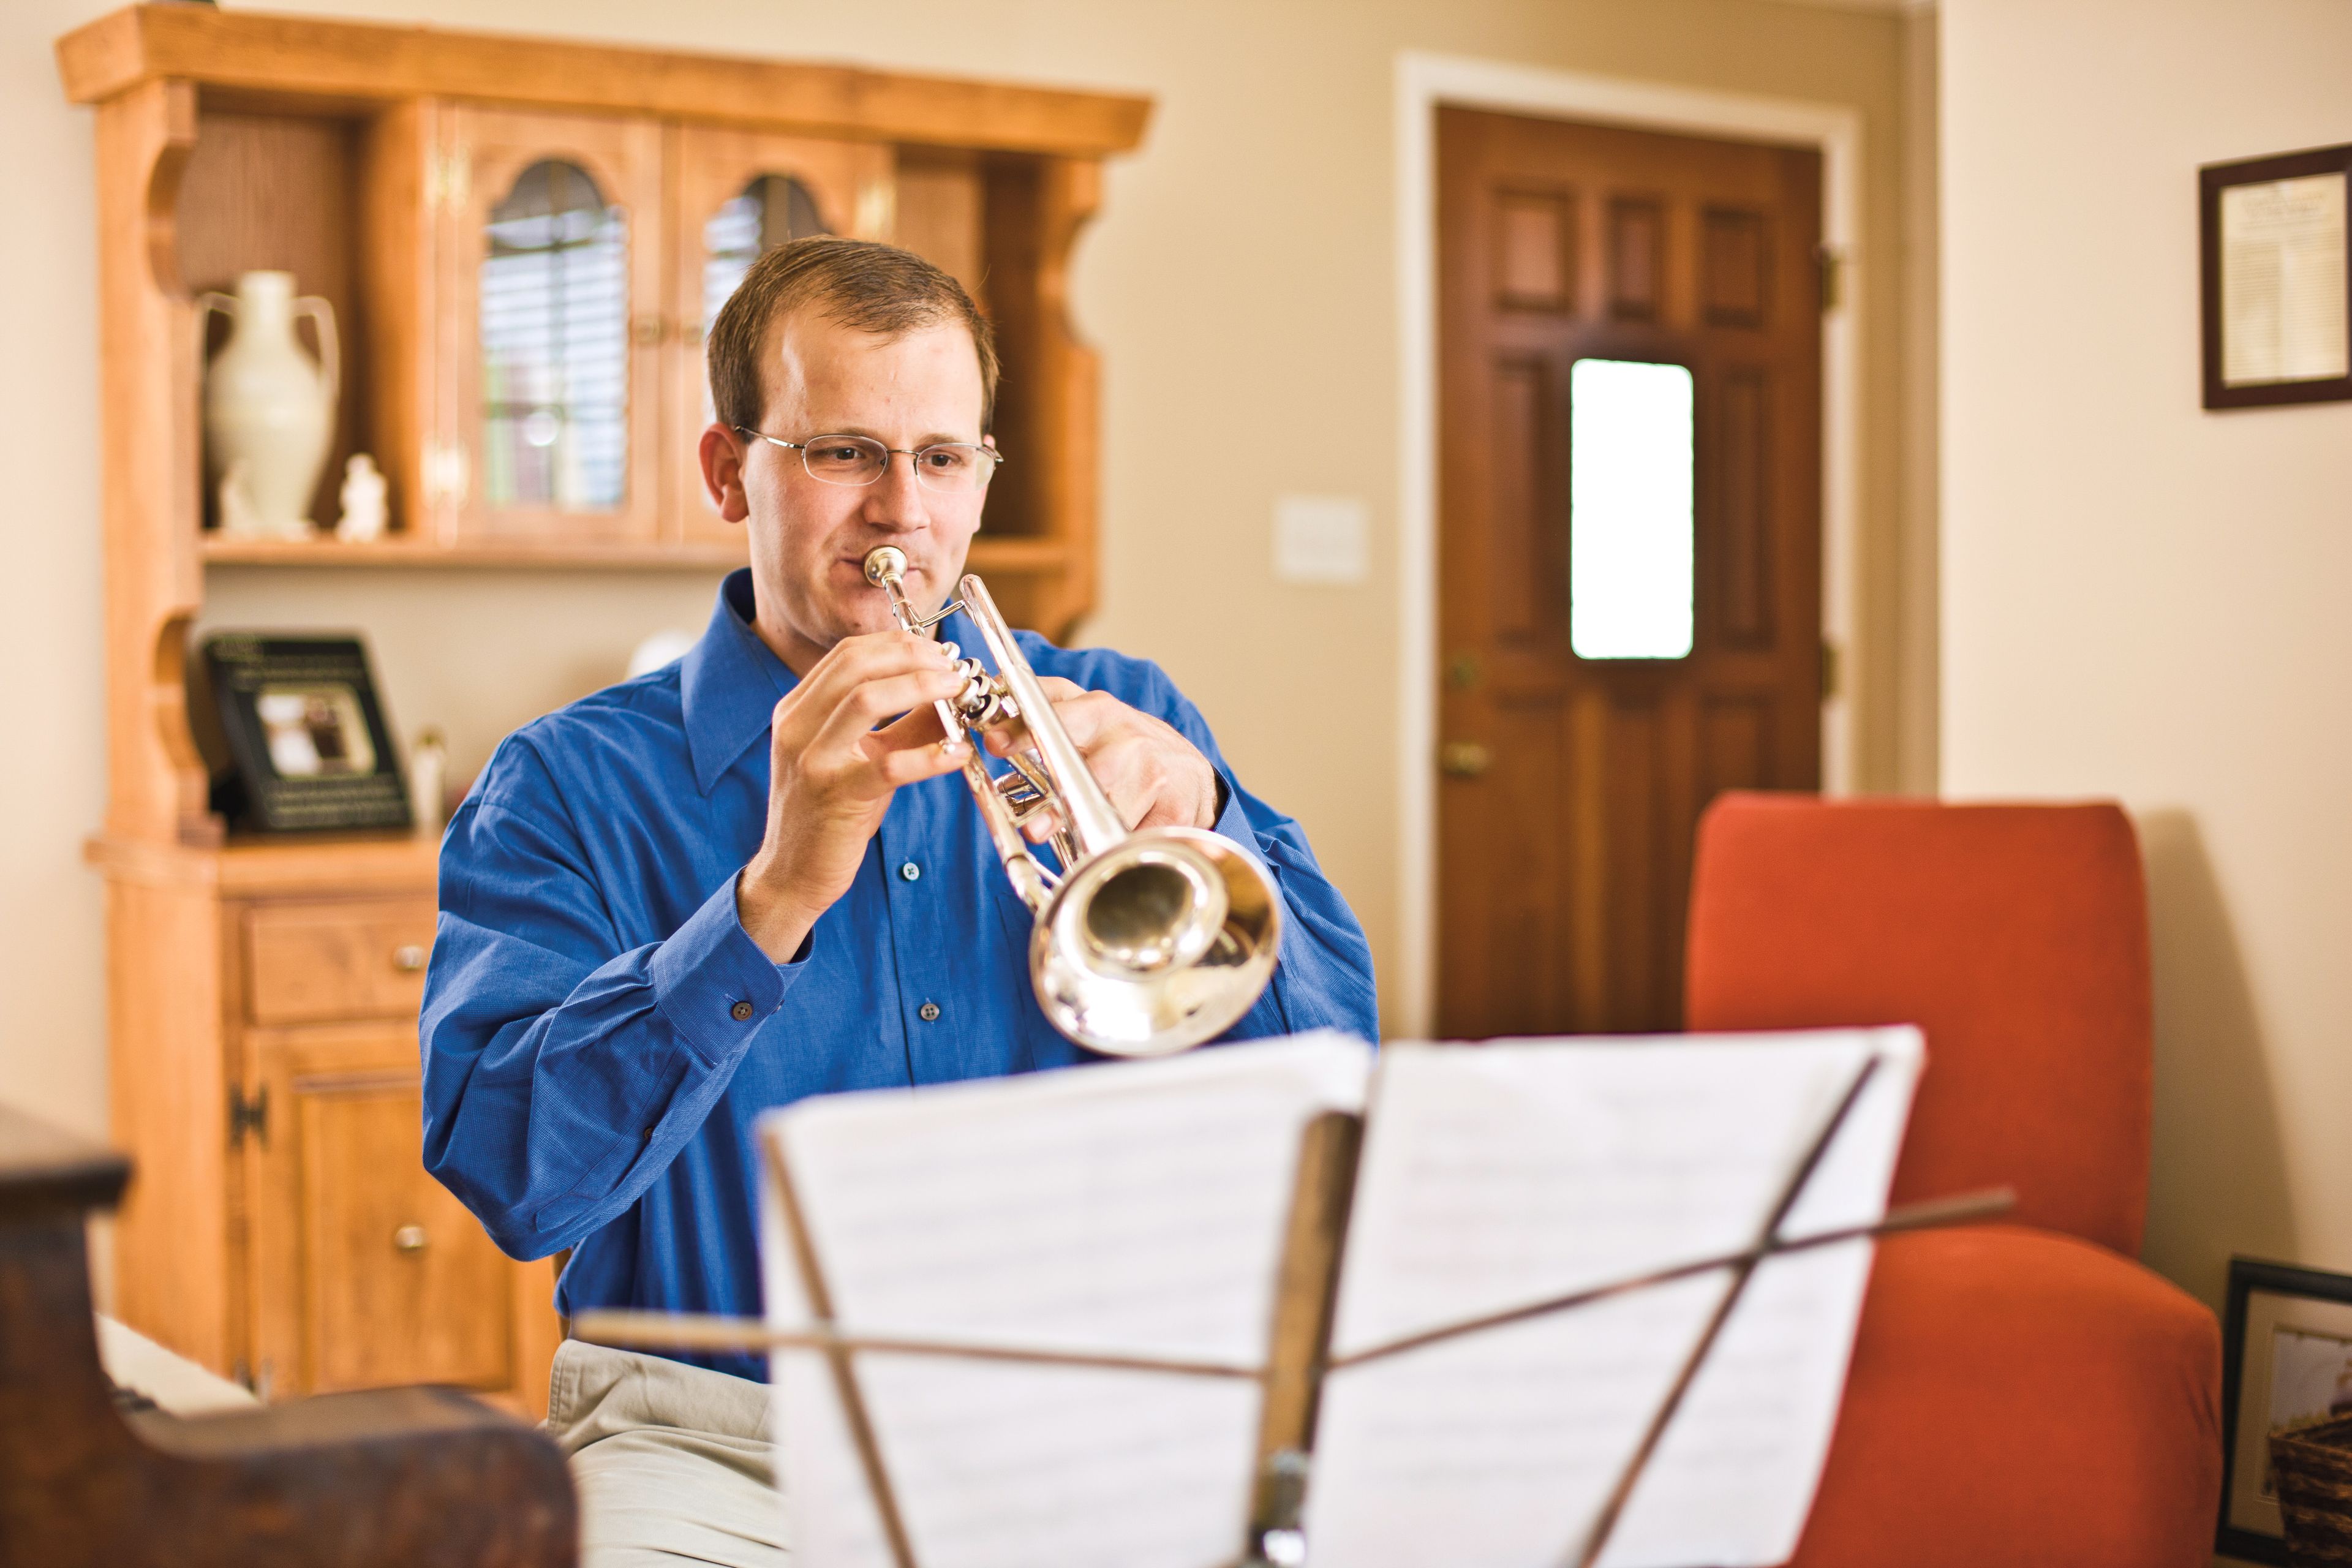 A man plays his trumpet while sitting in the living room.